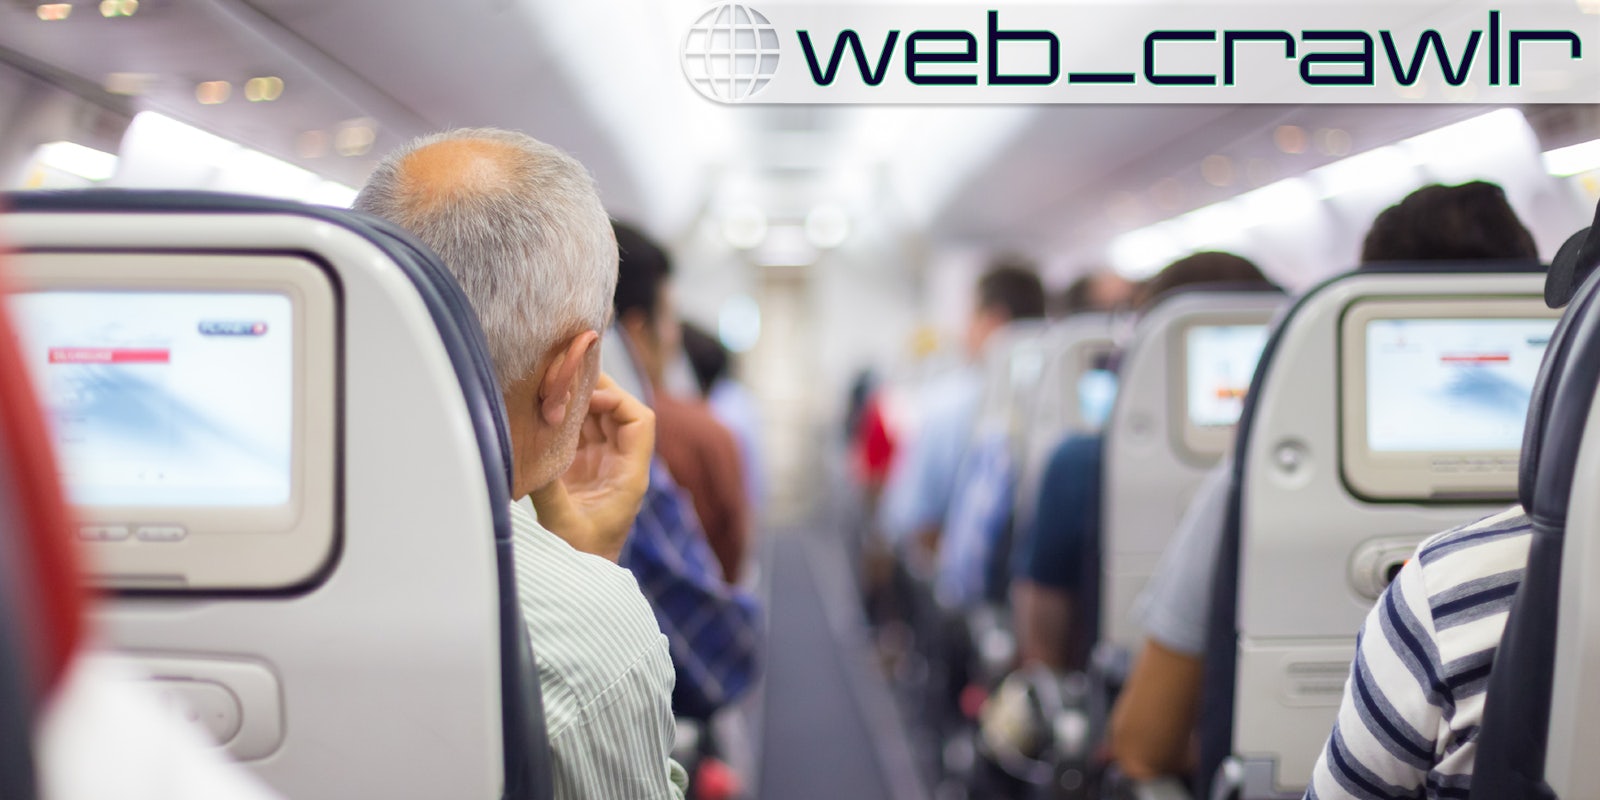 A person looking up the aisle of an airplane. The Daily Dot newsletter web_crawlr logo is in the top right corner.